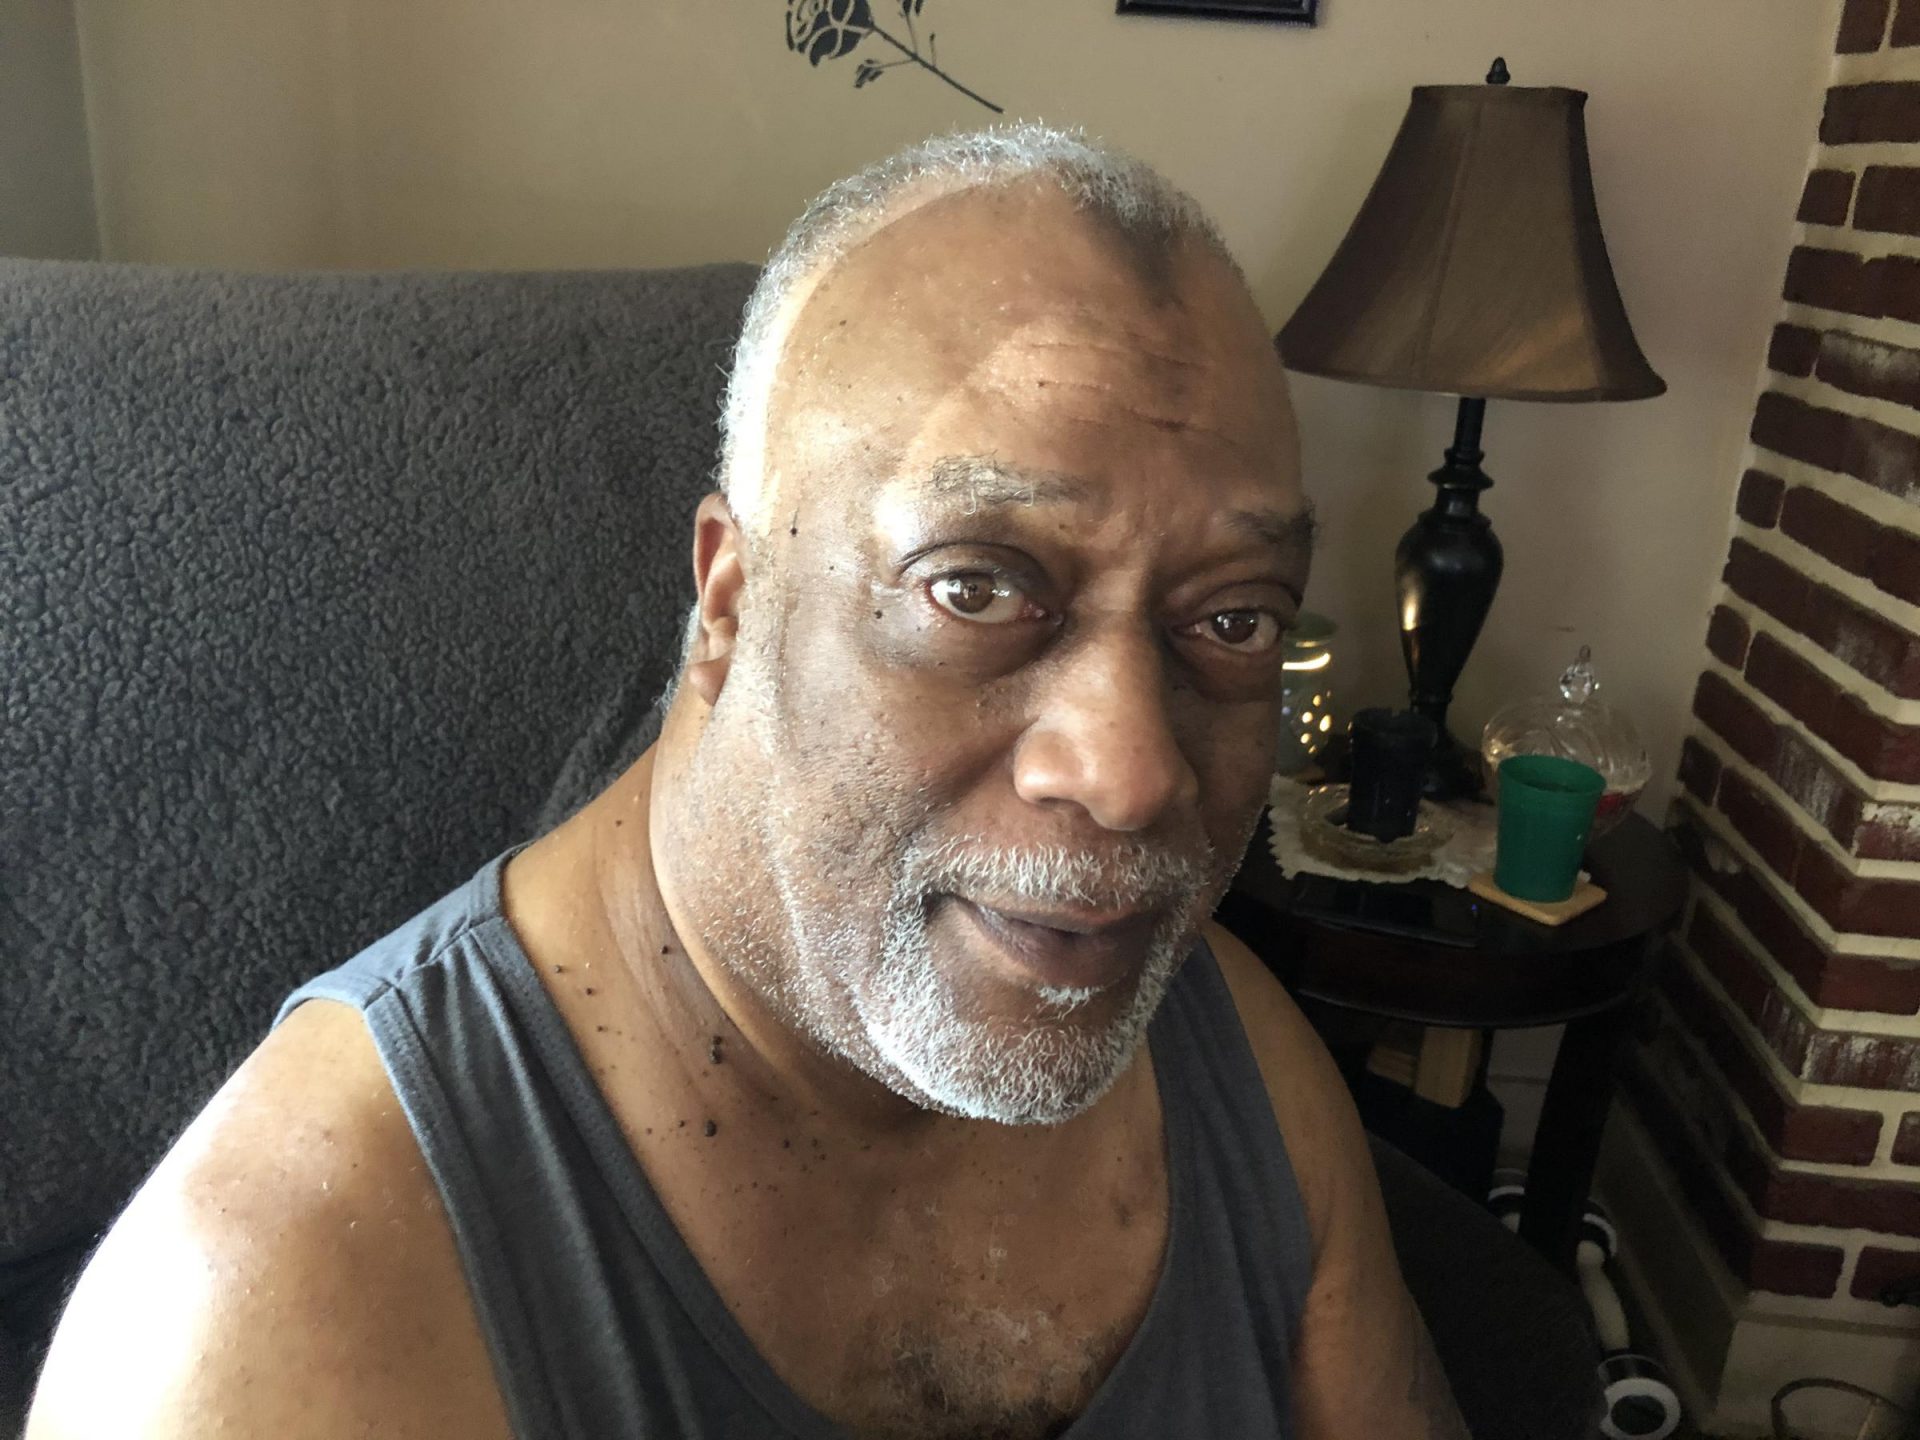 Edward Sneed, 67, was a student at Westinghouse High School in 1968. He remembers how the rioting impacted his community of Homewood.